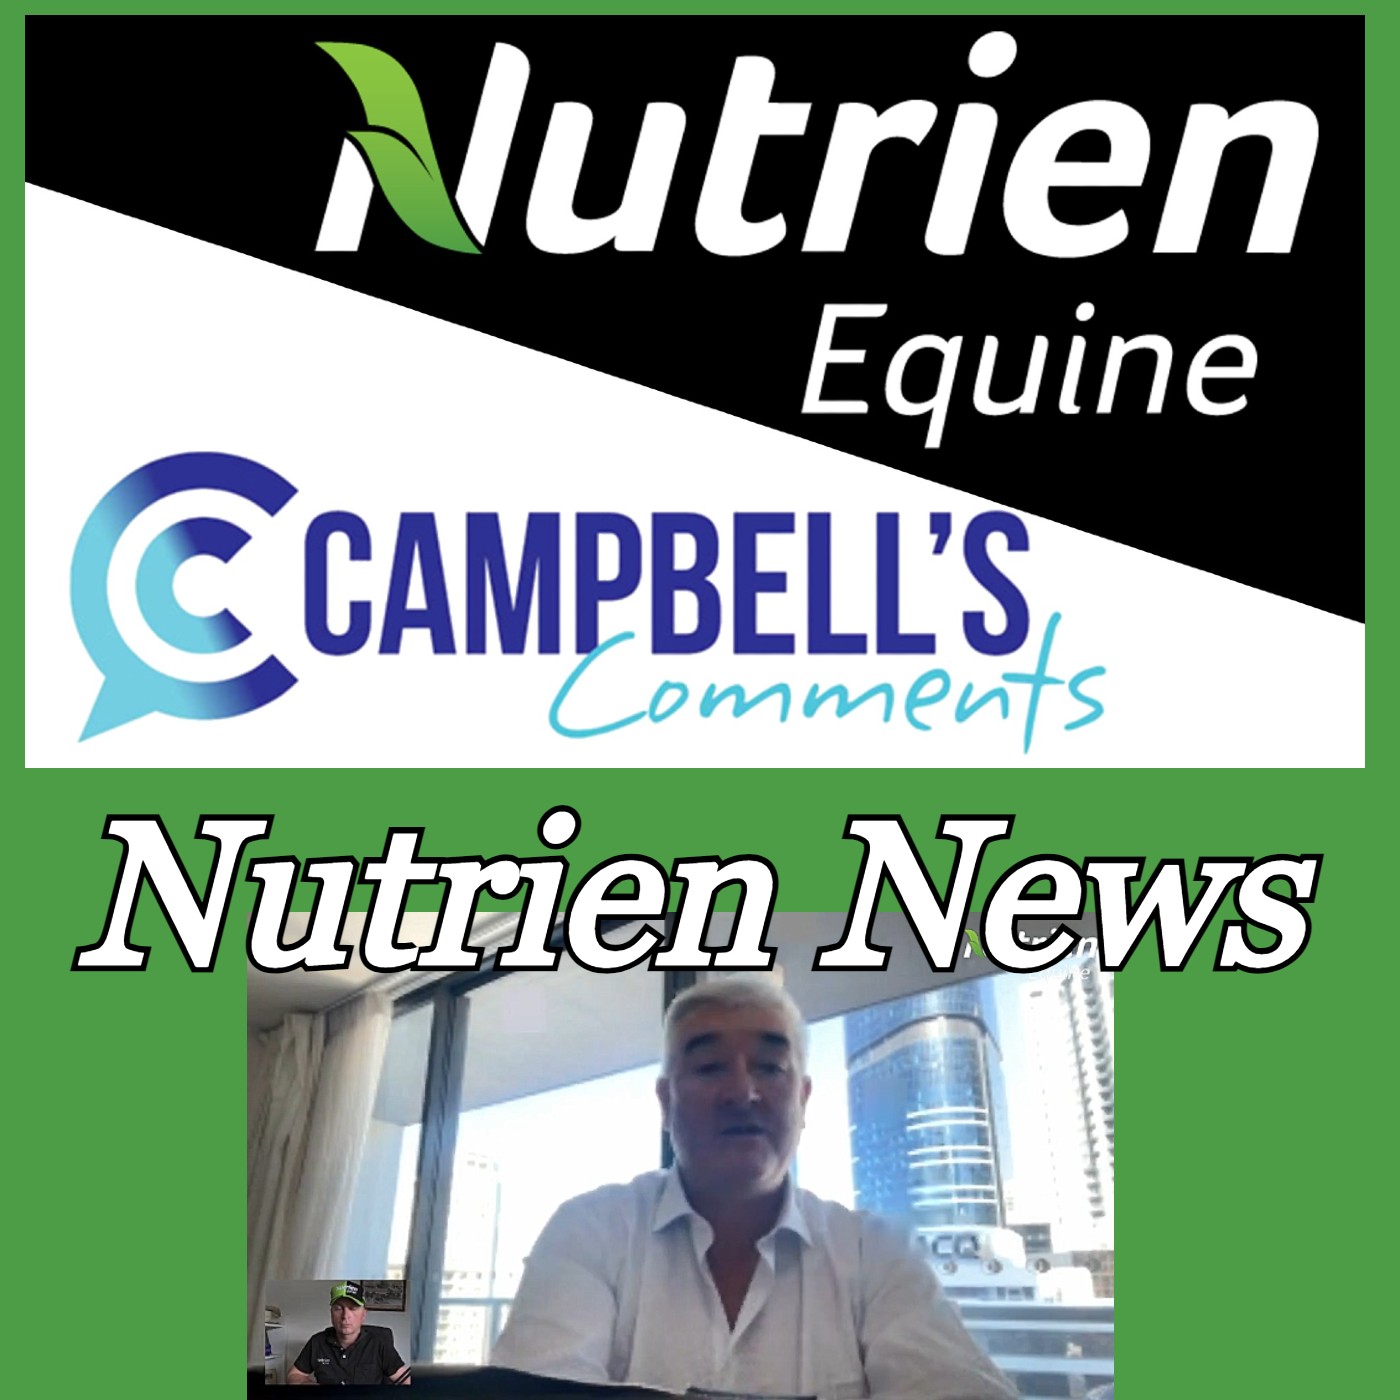 You are currently viewing 181: Campbells Comments Nutrien News with Mark Barton.